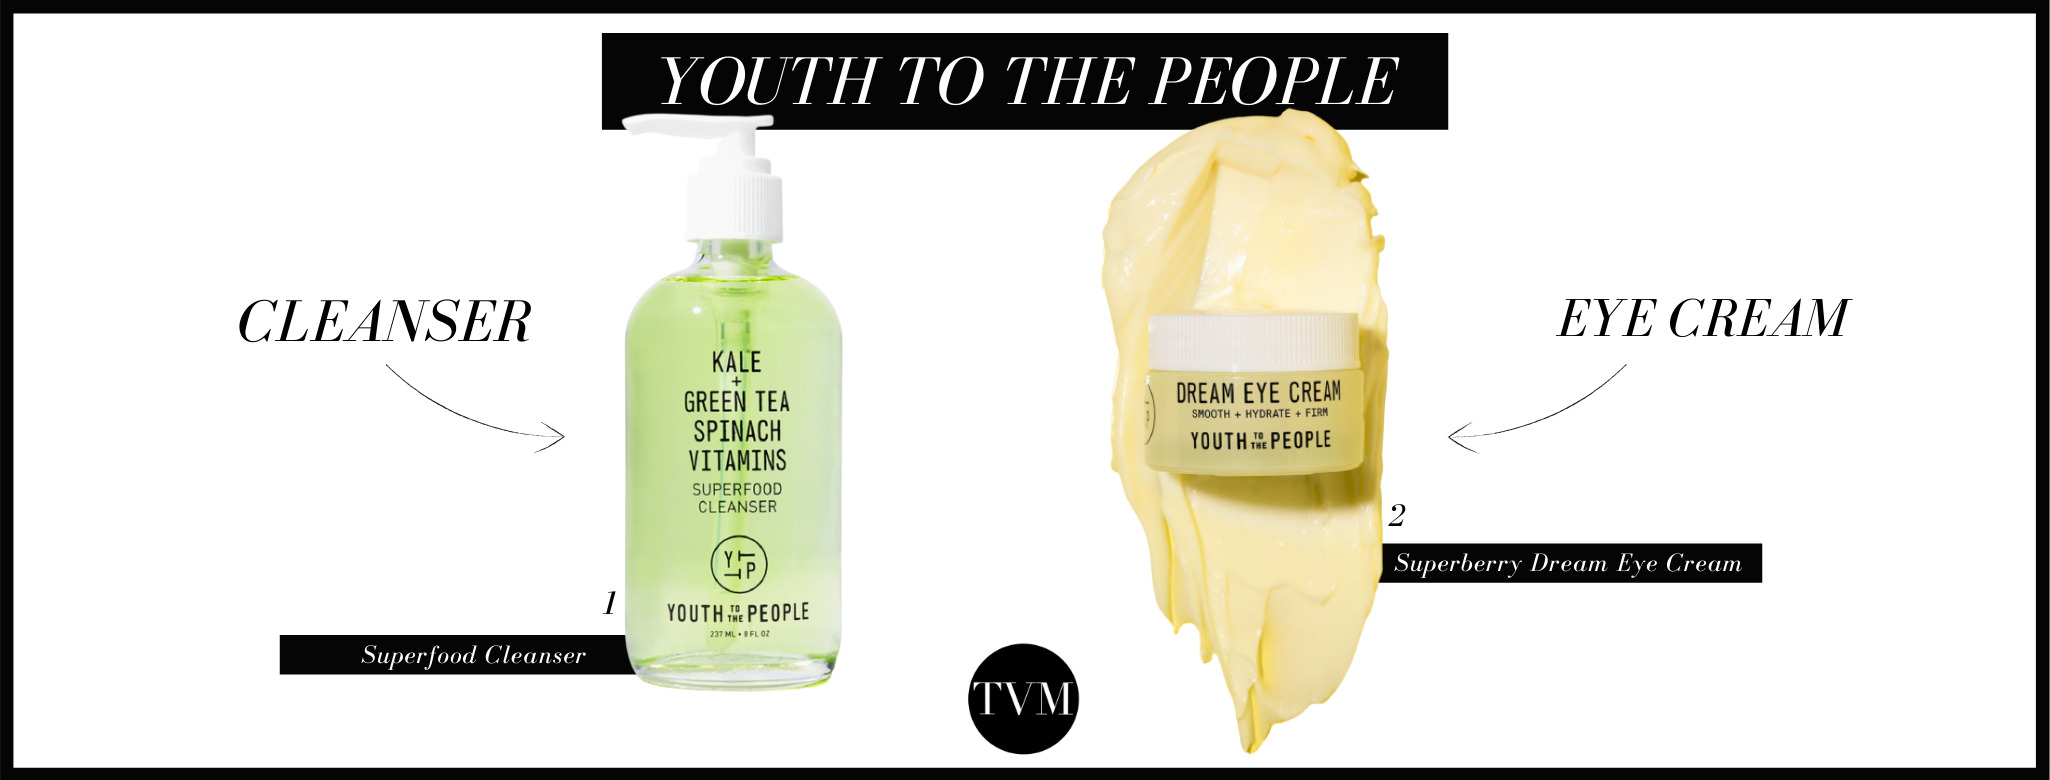 Youth to the people is a brand that is the perfect balance between good skincare and sustainability. When it comes to packaging, they are very conscious of the problems that the beauty industry faces. Because of that, their products have glass packaging that can be reused to help reduce the quantity of plastic waste created by the beauty industry